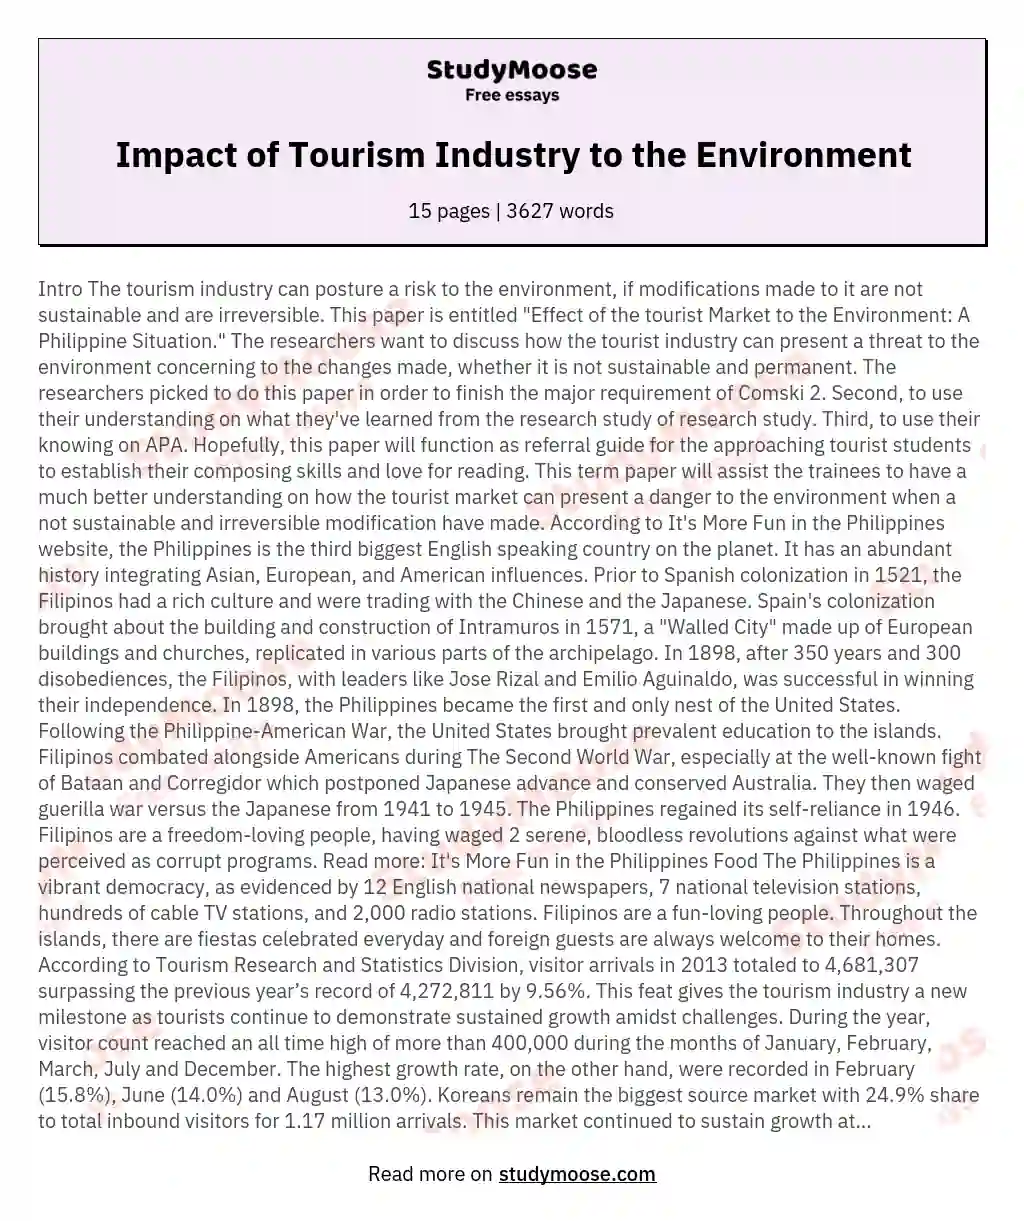 Impact of Tourism Industry to the Environment essay